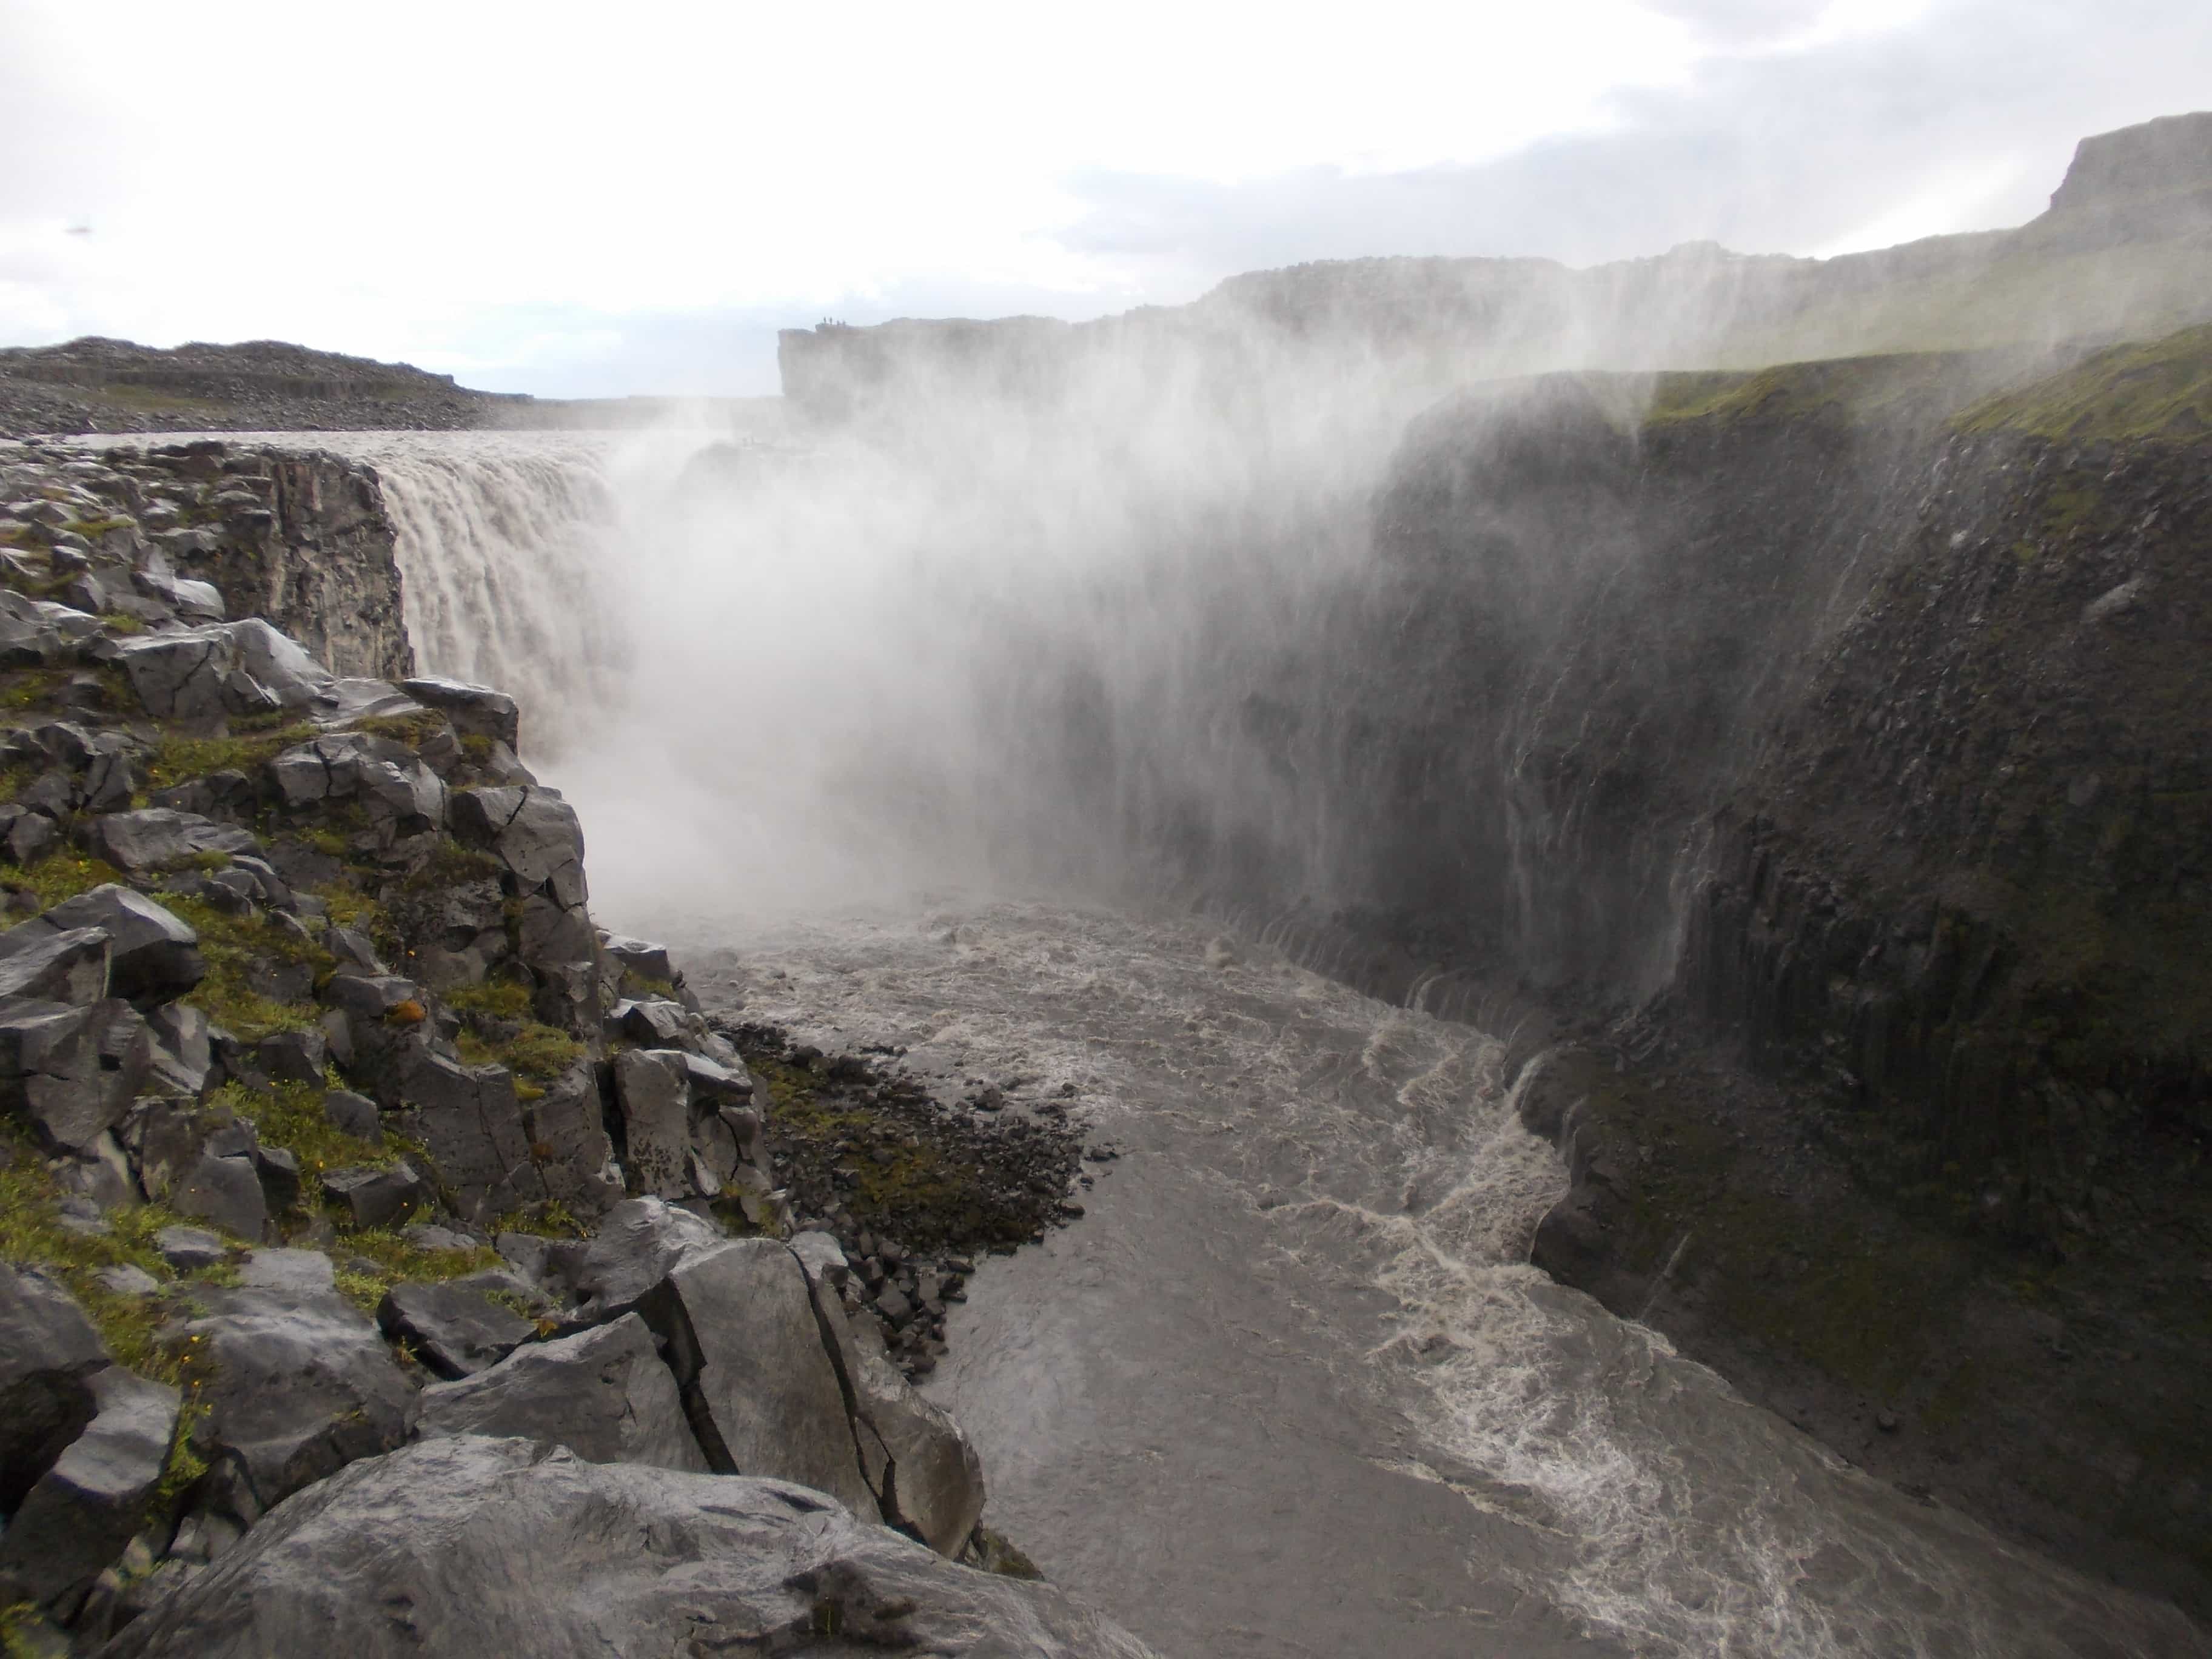 Work for board and lodging europe and see Iceland's waterfalls